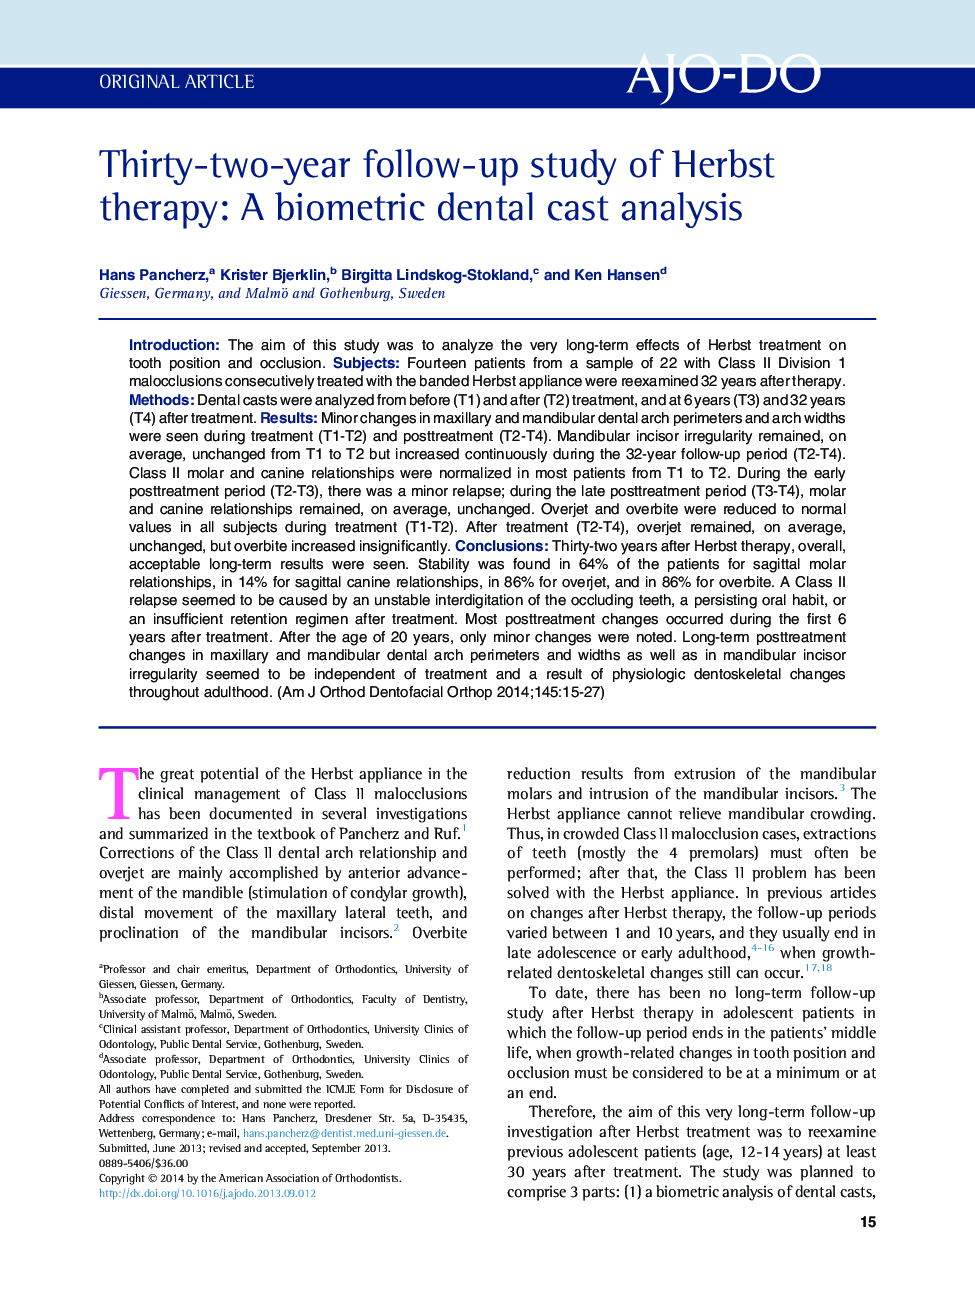 Thirty-two-year follow-up study of Herbst therapy: A biometric dental cast analysis 